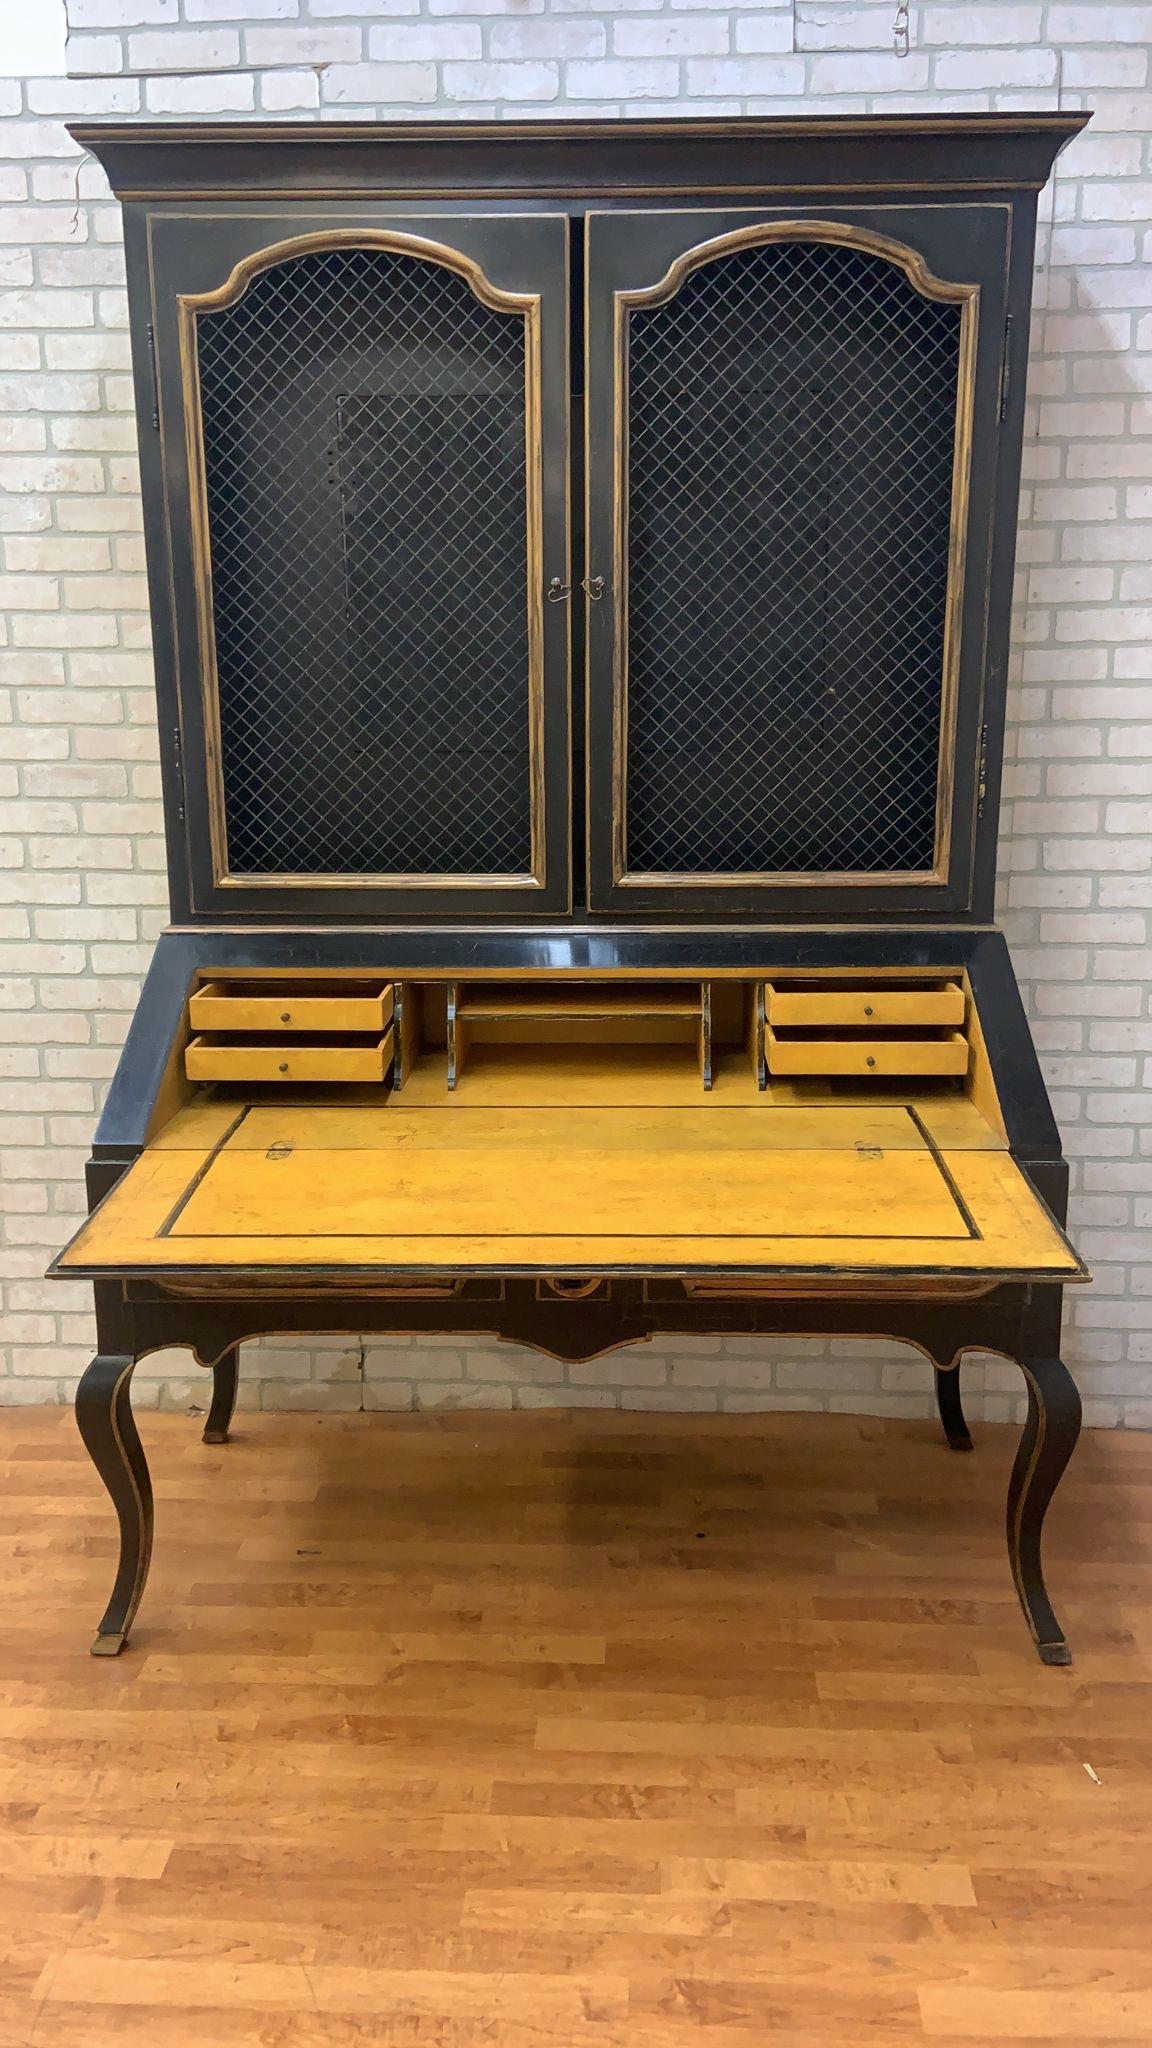 Vintage Louis XV Style Minton Spidell Drop-Front Hand Painted Secretary Cabinet

This Vintage Minton-Spidell Louis XV Style Drop-Front Secretary Cabinet is hand-painted with distressed black lacquer accented with gold leaf highlights and a mustard